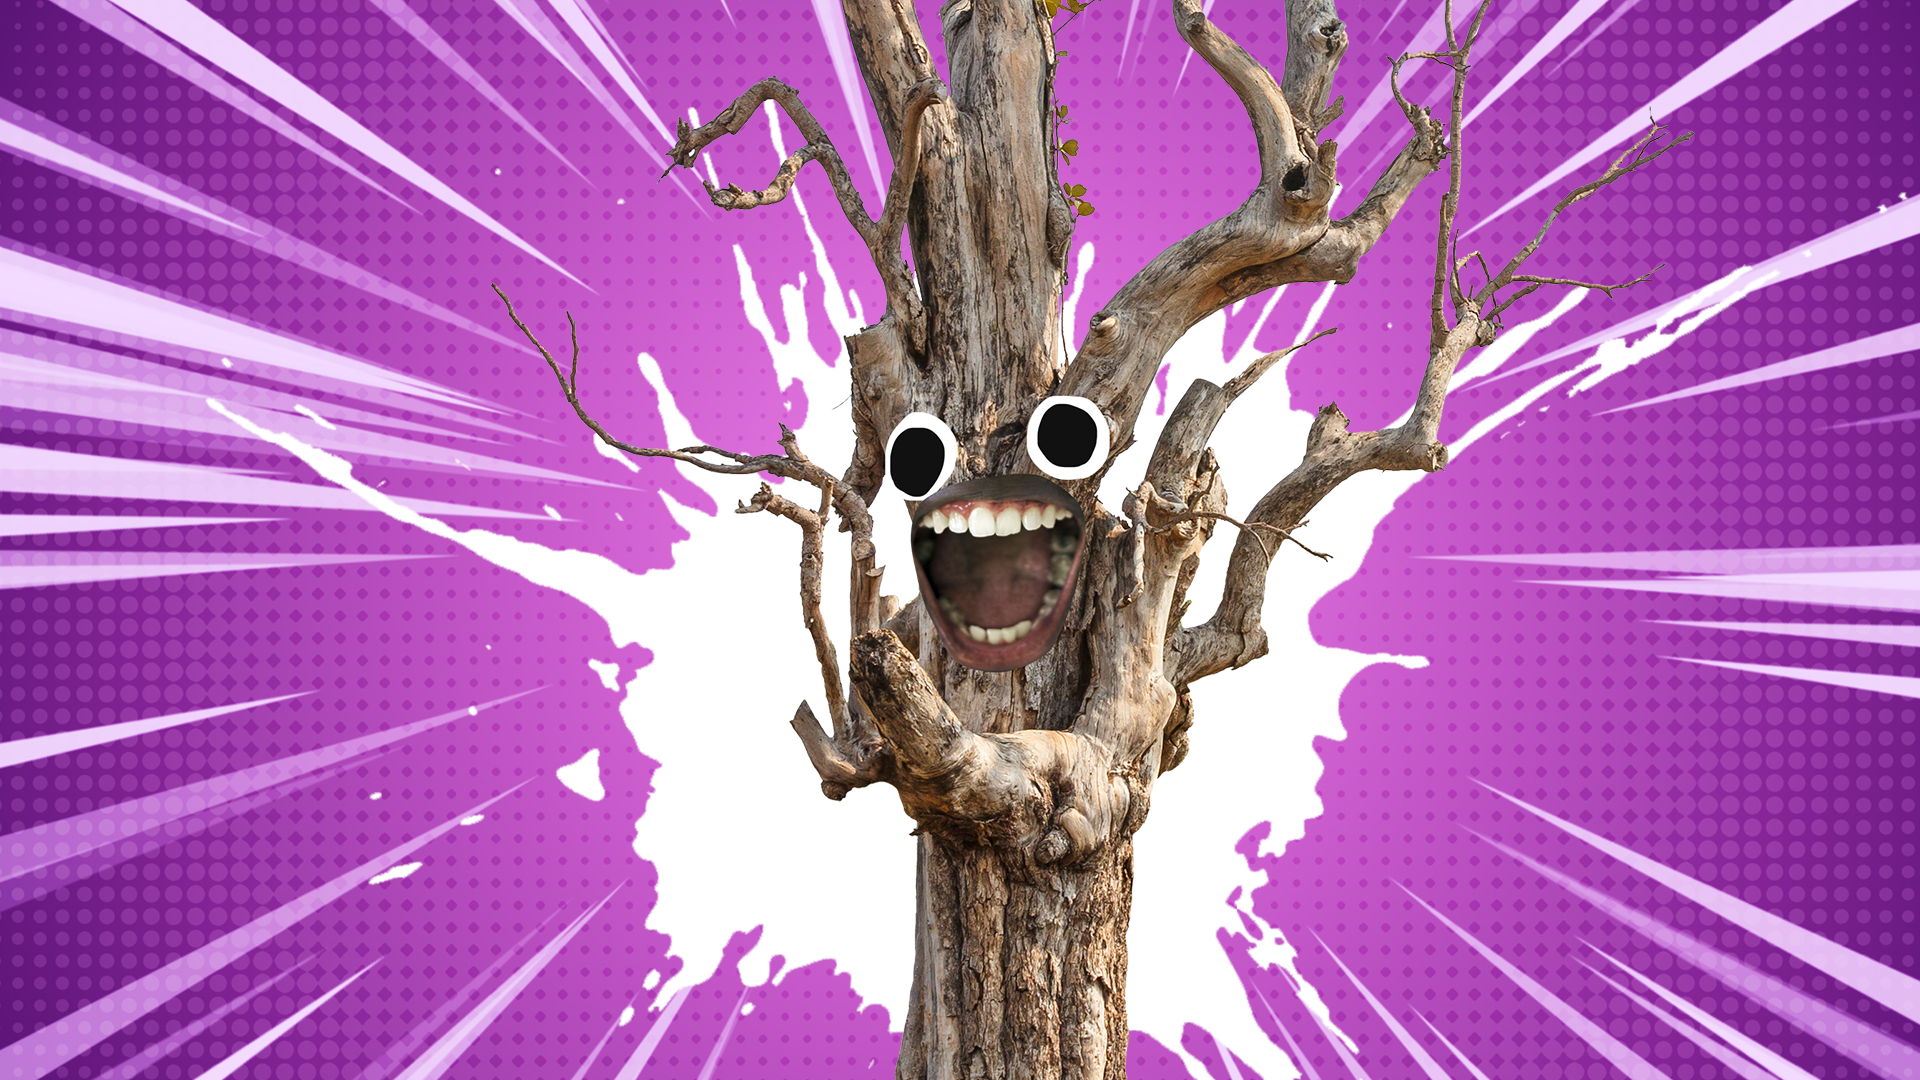 Groot from Guardians of the Galaxy